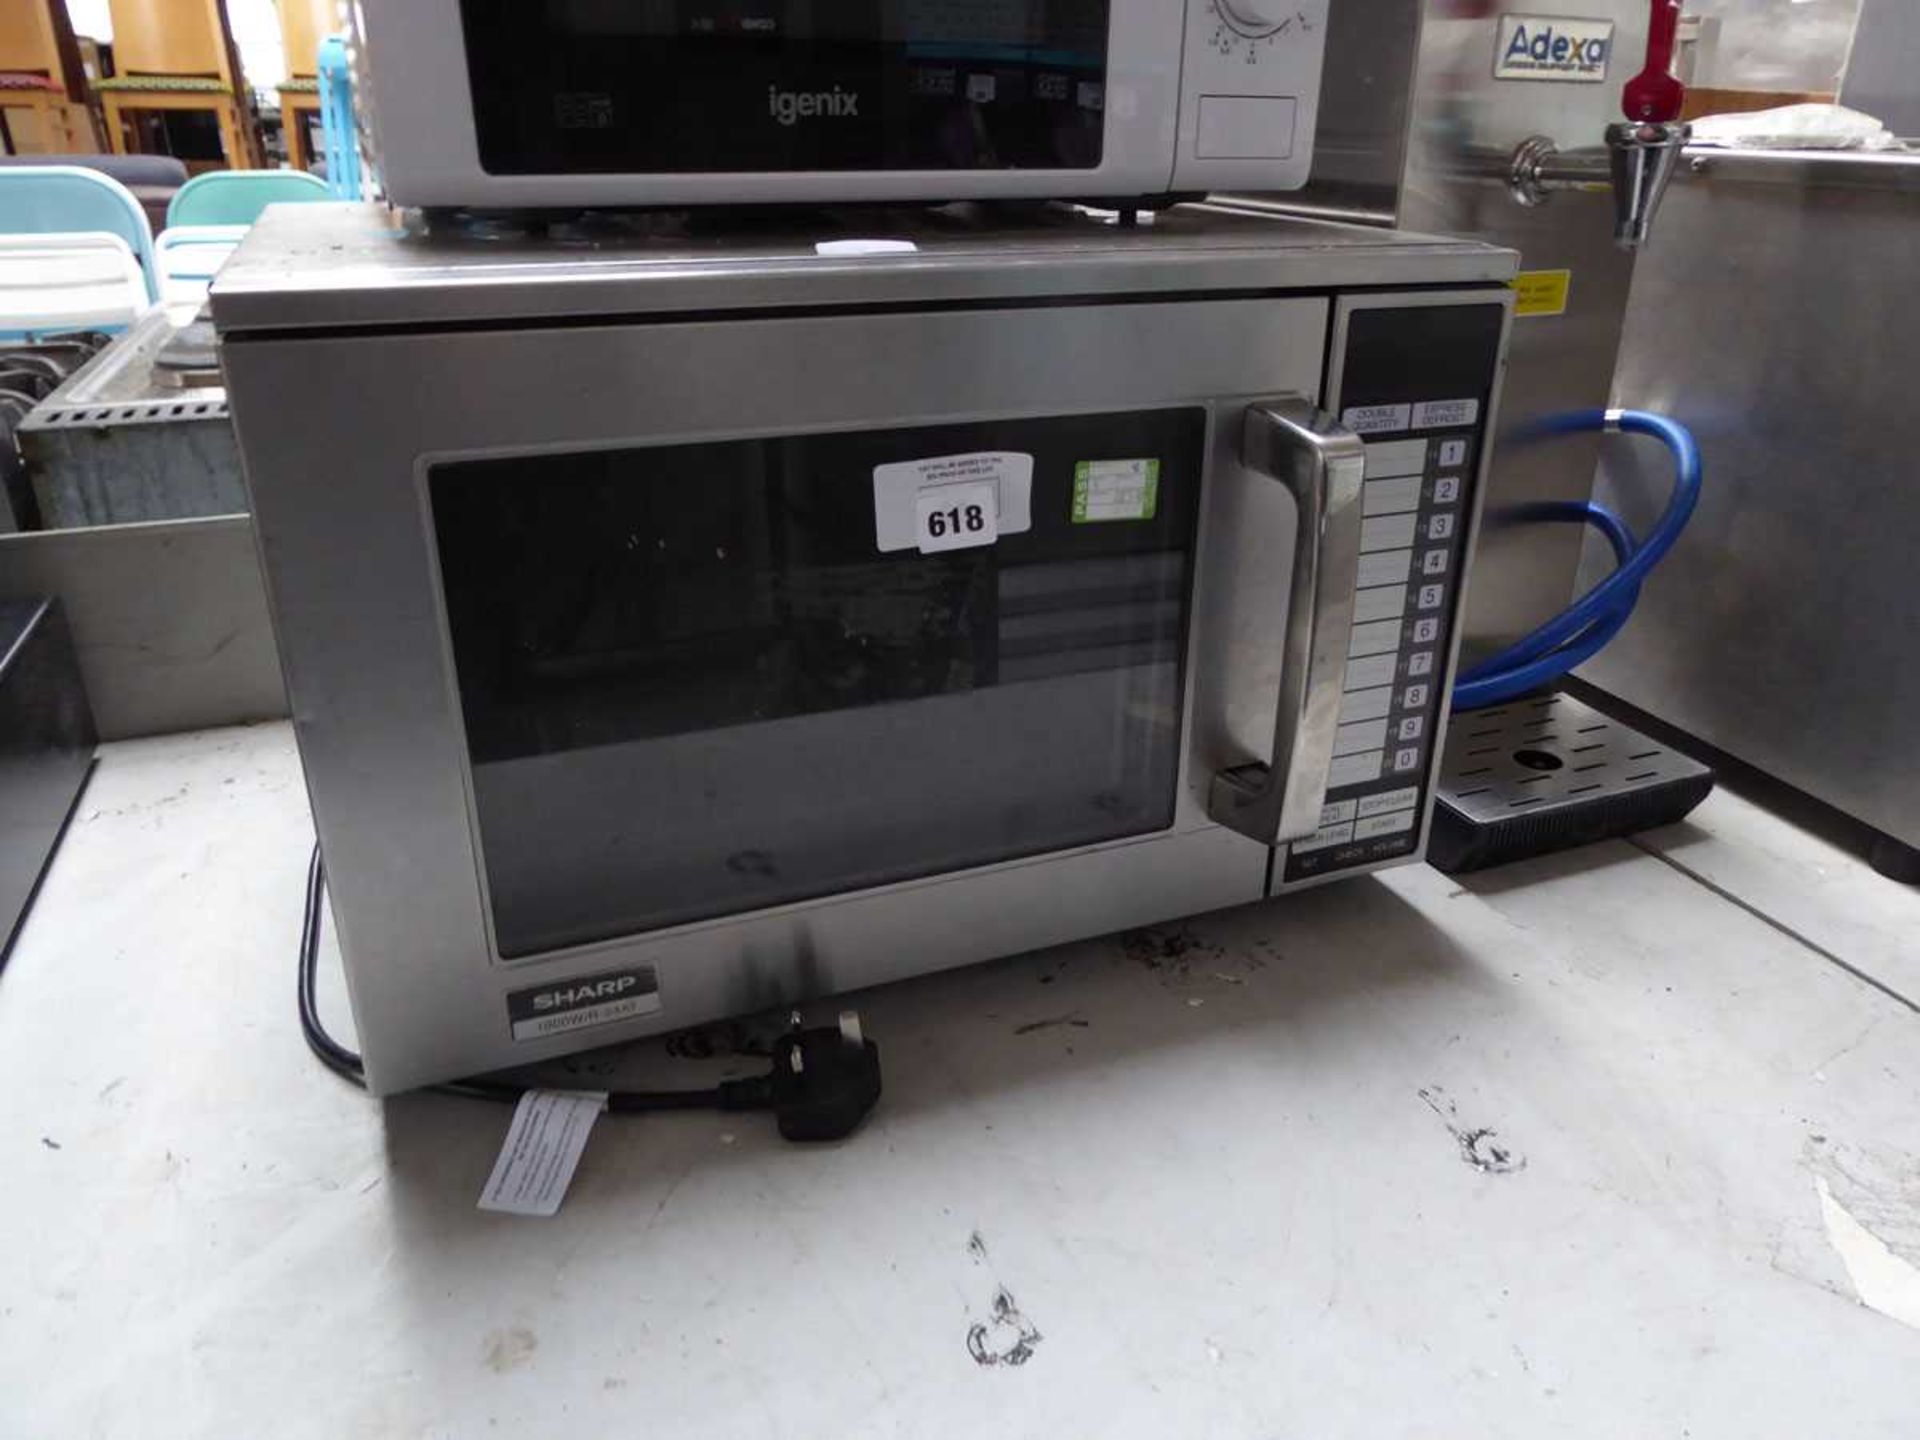 +VAT 52cm Sharp R-24AT microwave oven (Failed electrical test)